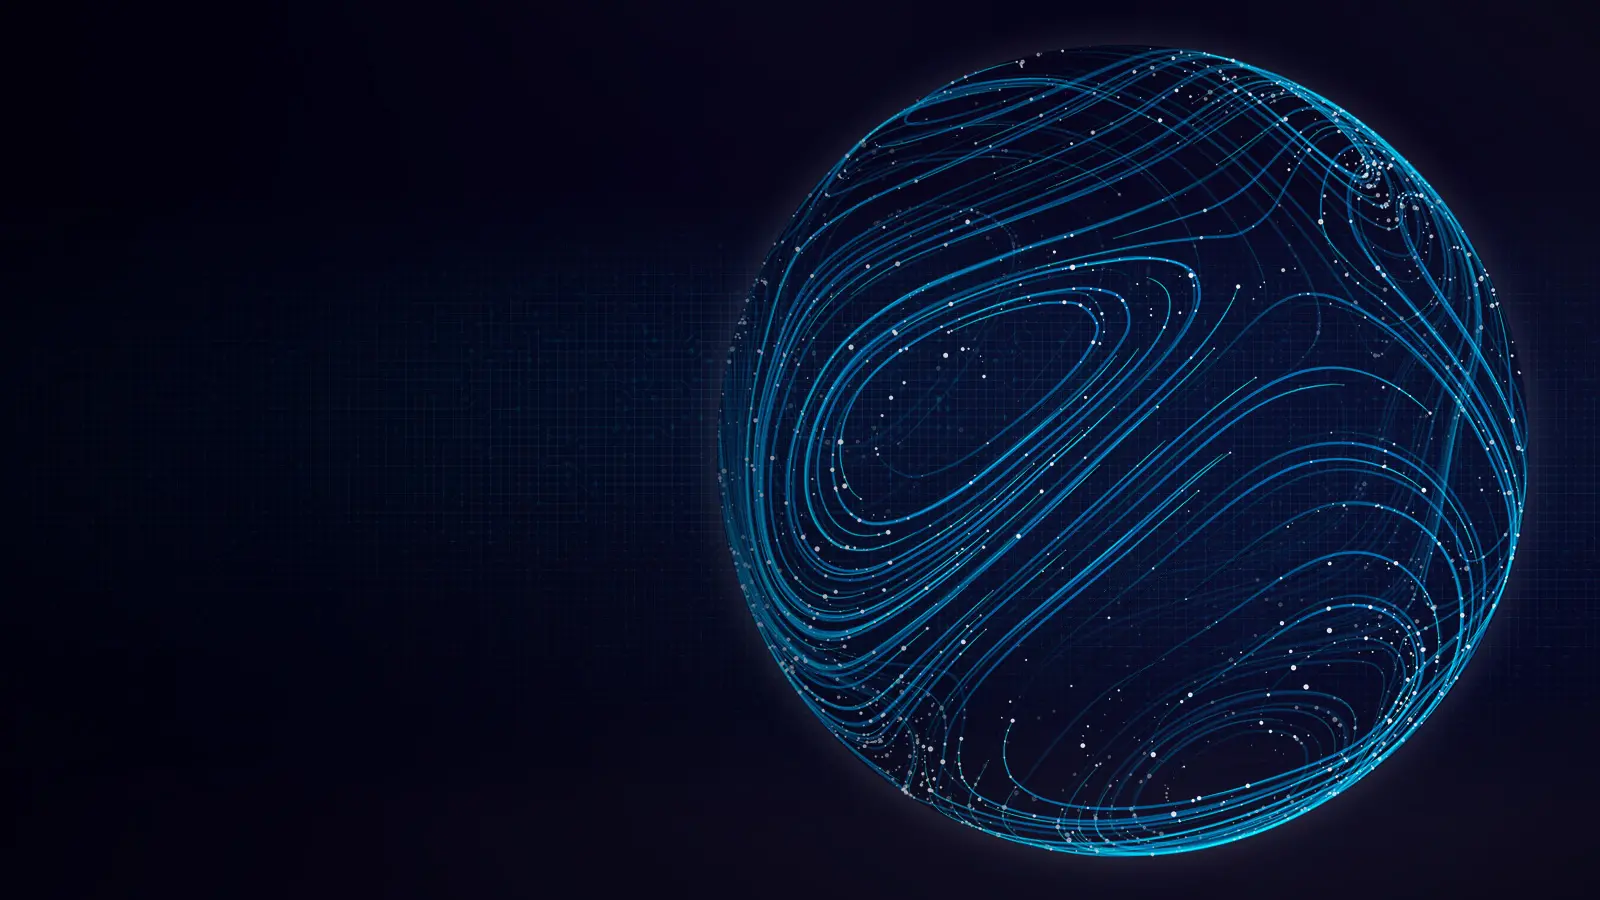 Dark background with a large 3D sphere made of blue and teal circles